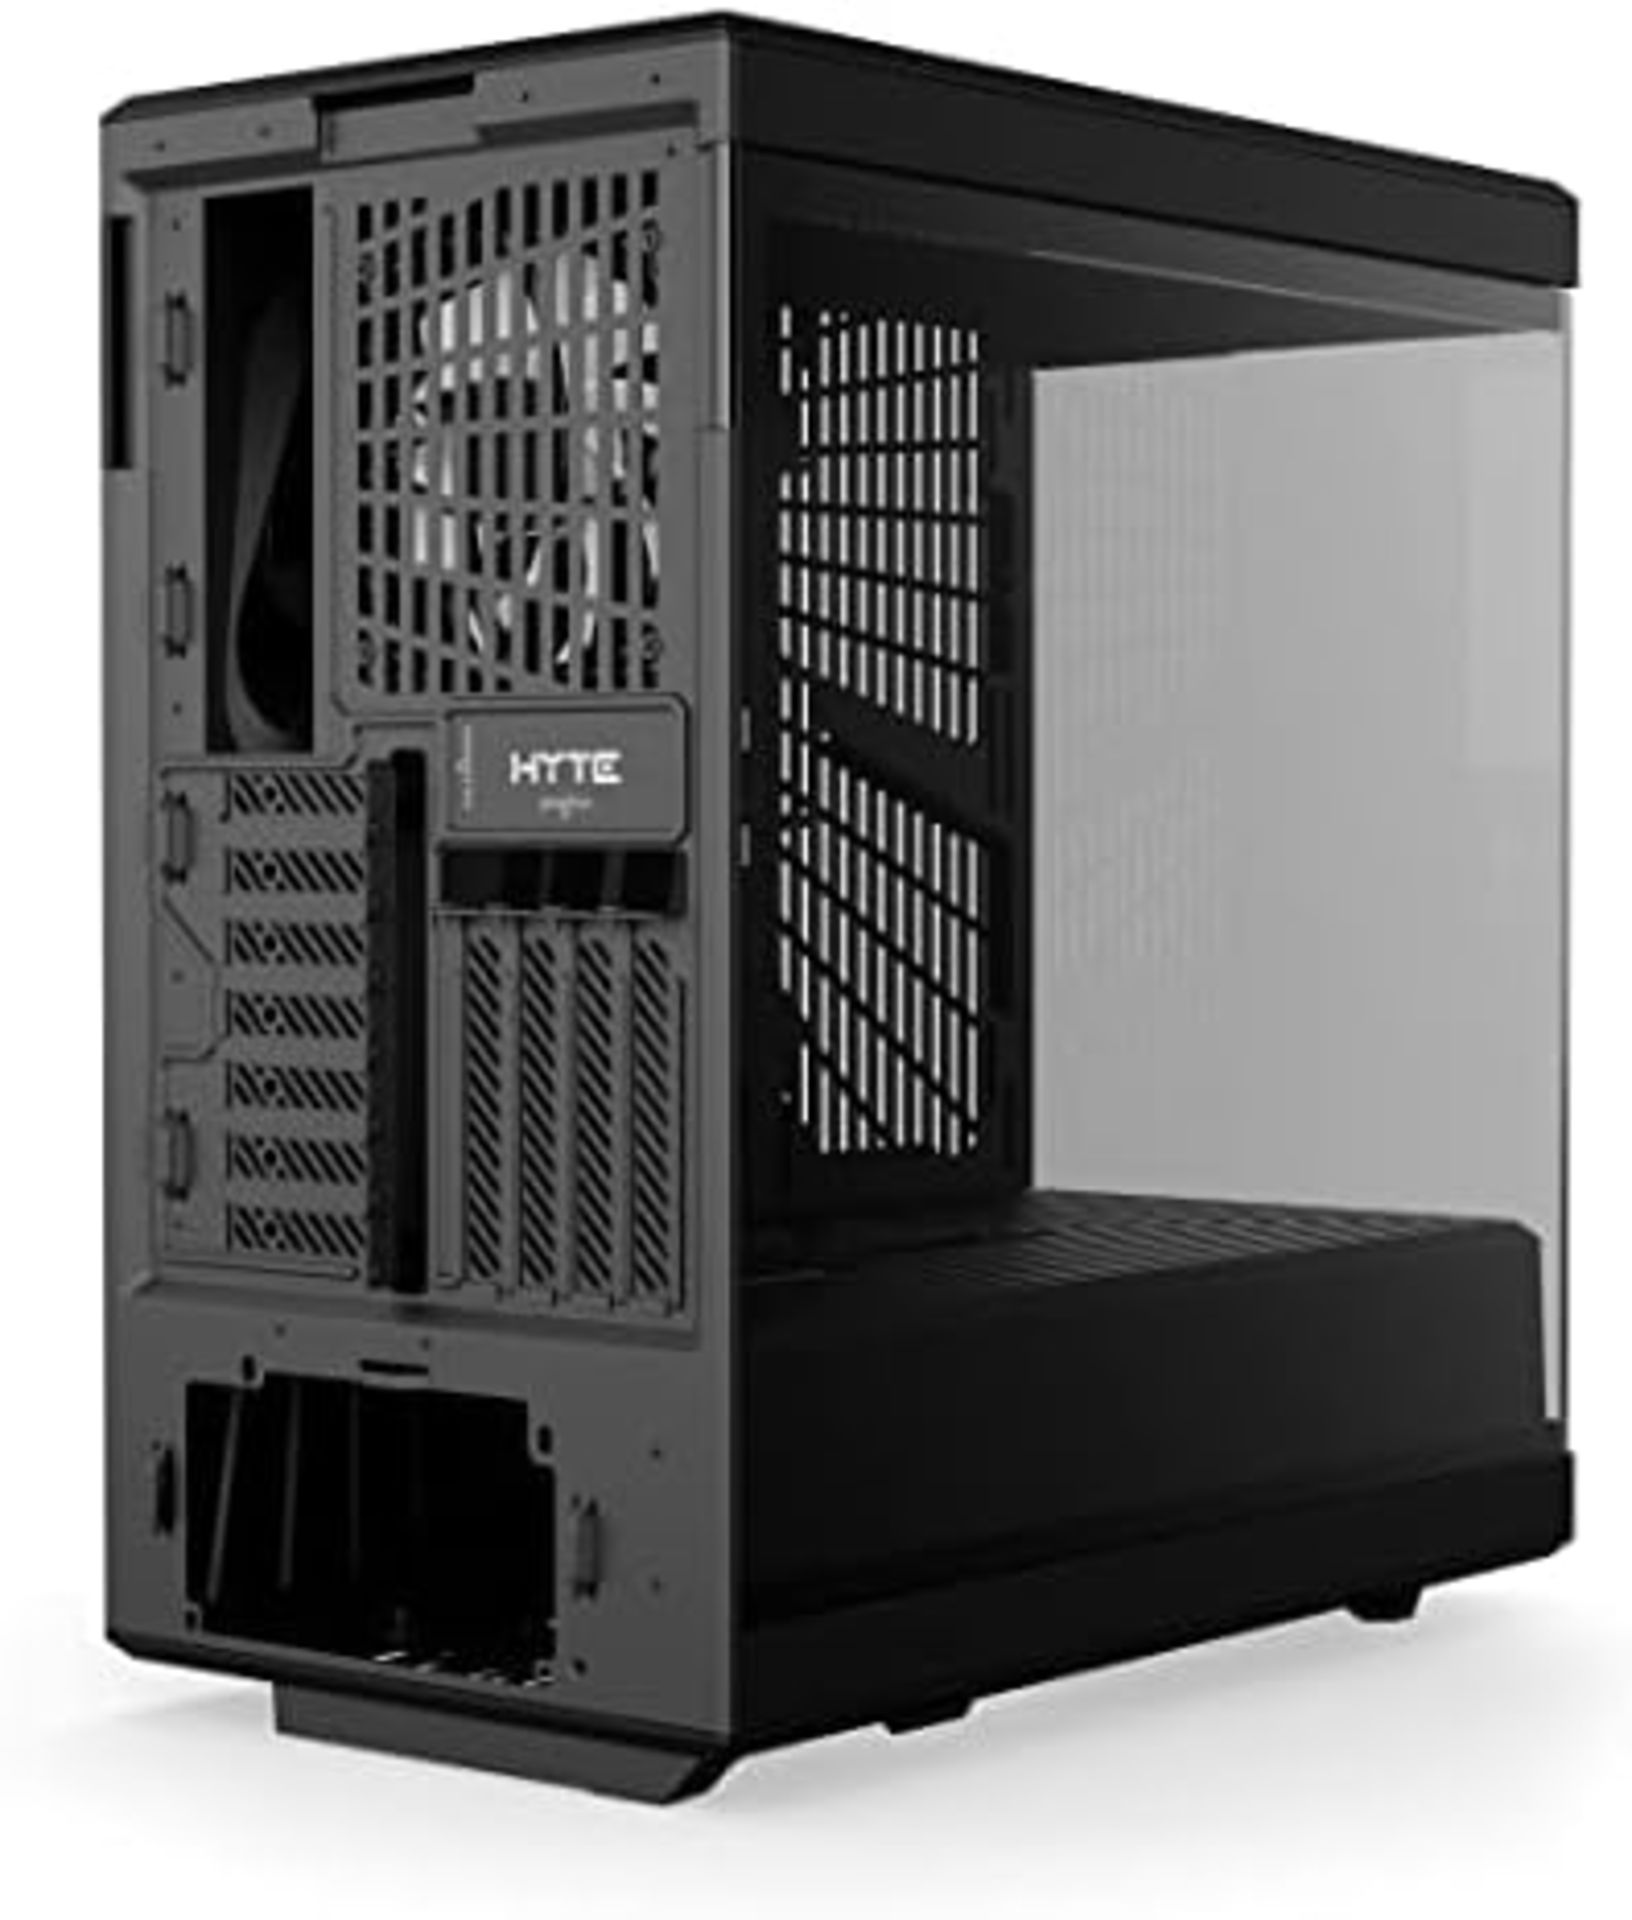 NEW & BOXED HYTE Y40 Mid-Tower ATX Case - Black. RRP £159.98. (R15R). The HYTE Y40 Mid-Tower ATX - Image 2 of 6